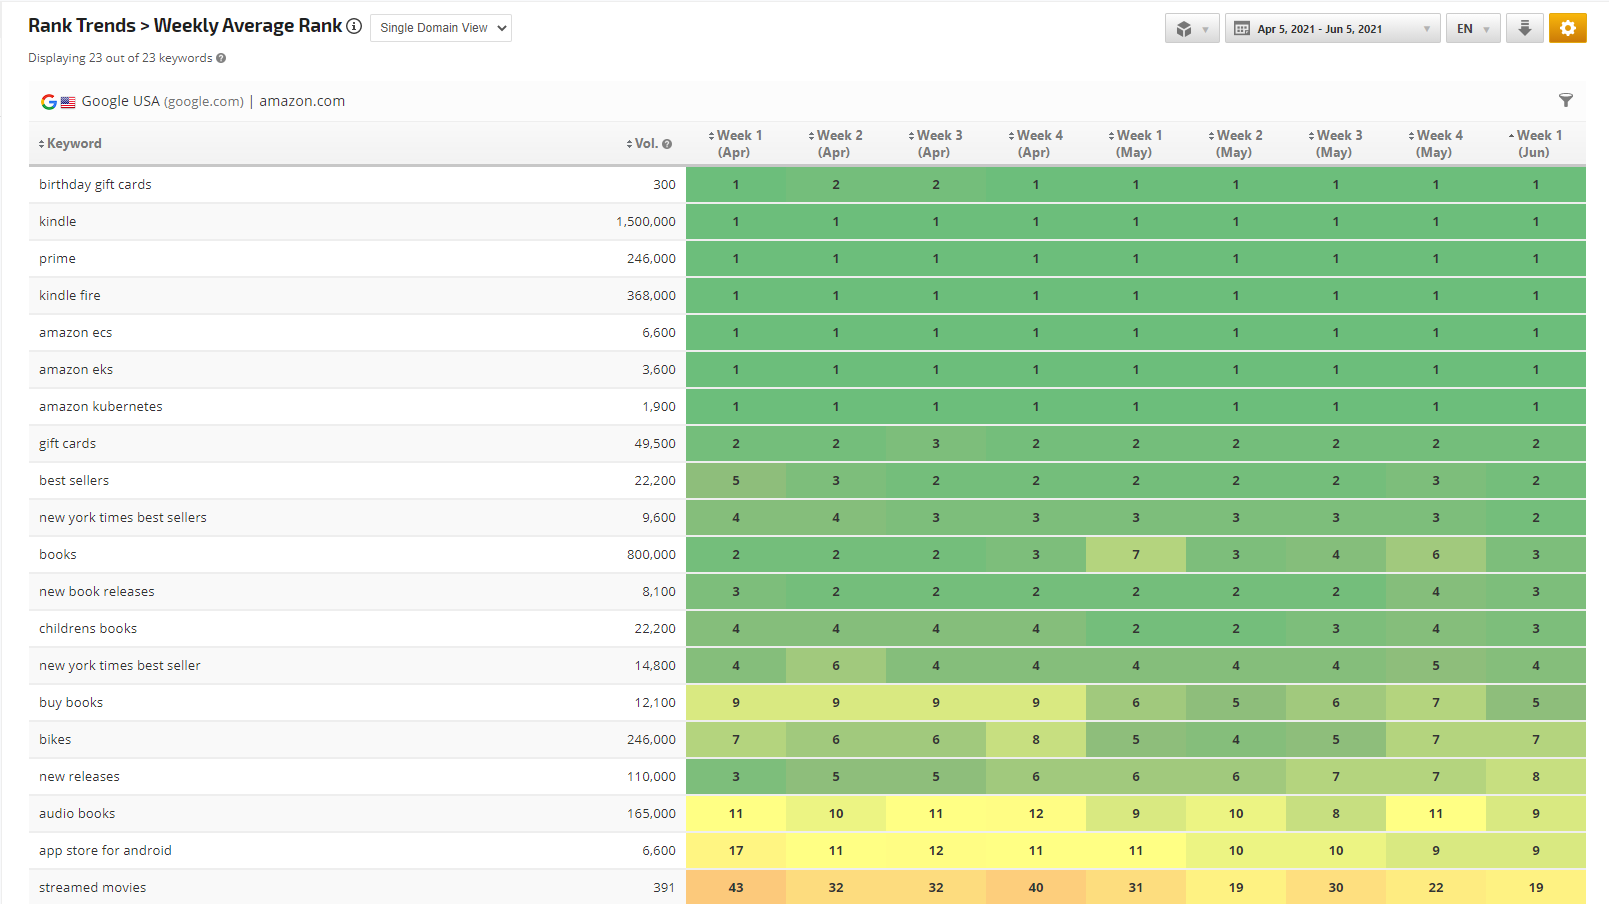 Weekly Snapshot in Single Domain View with Performance summary